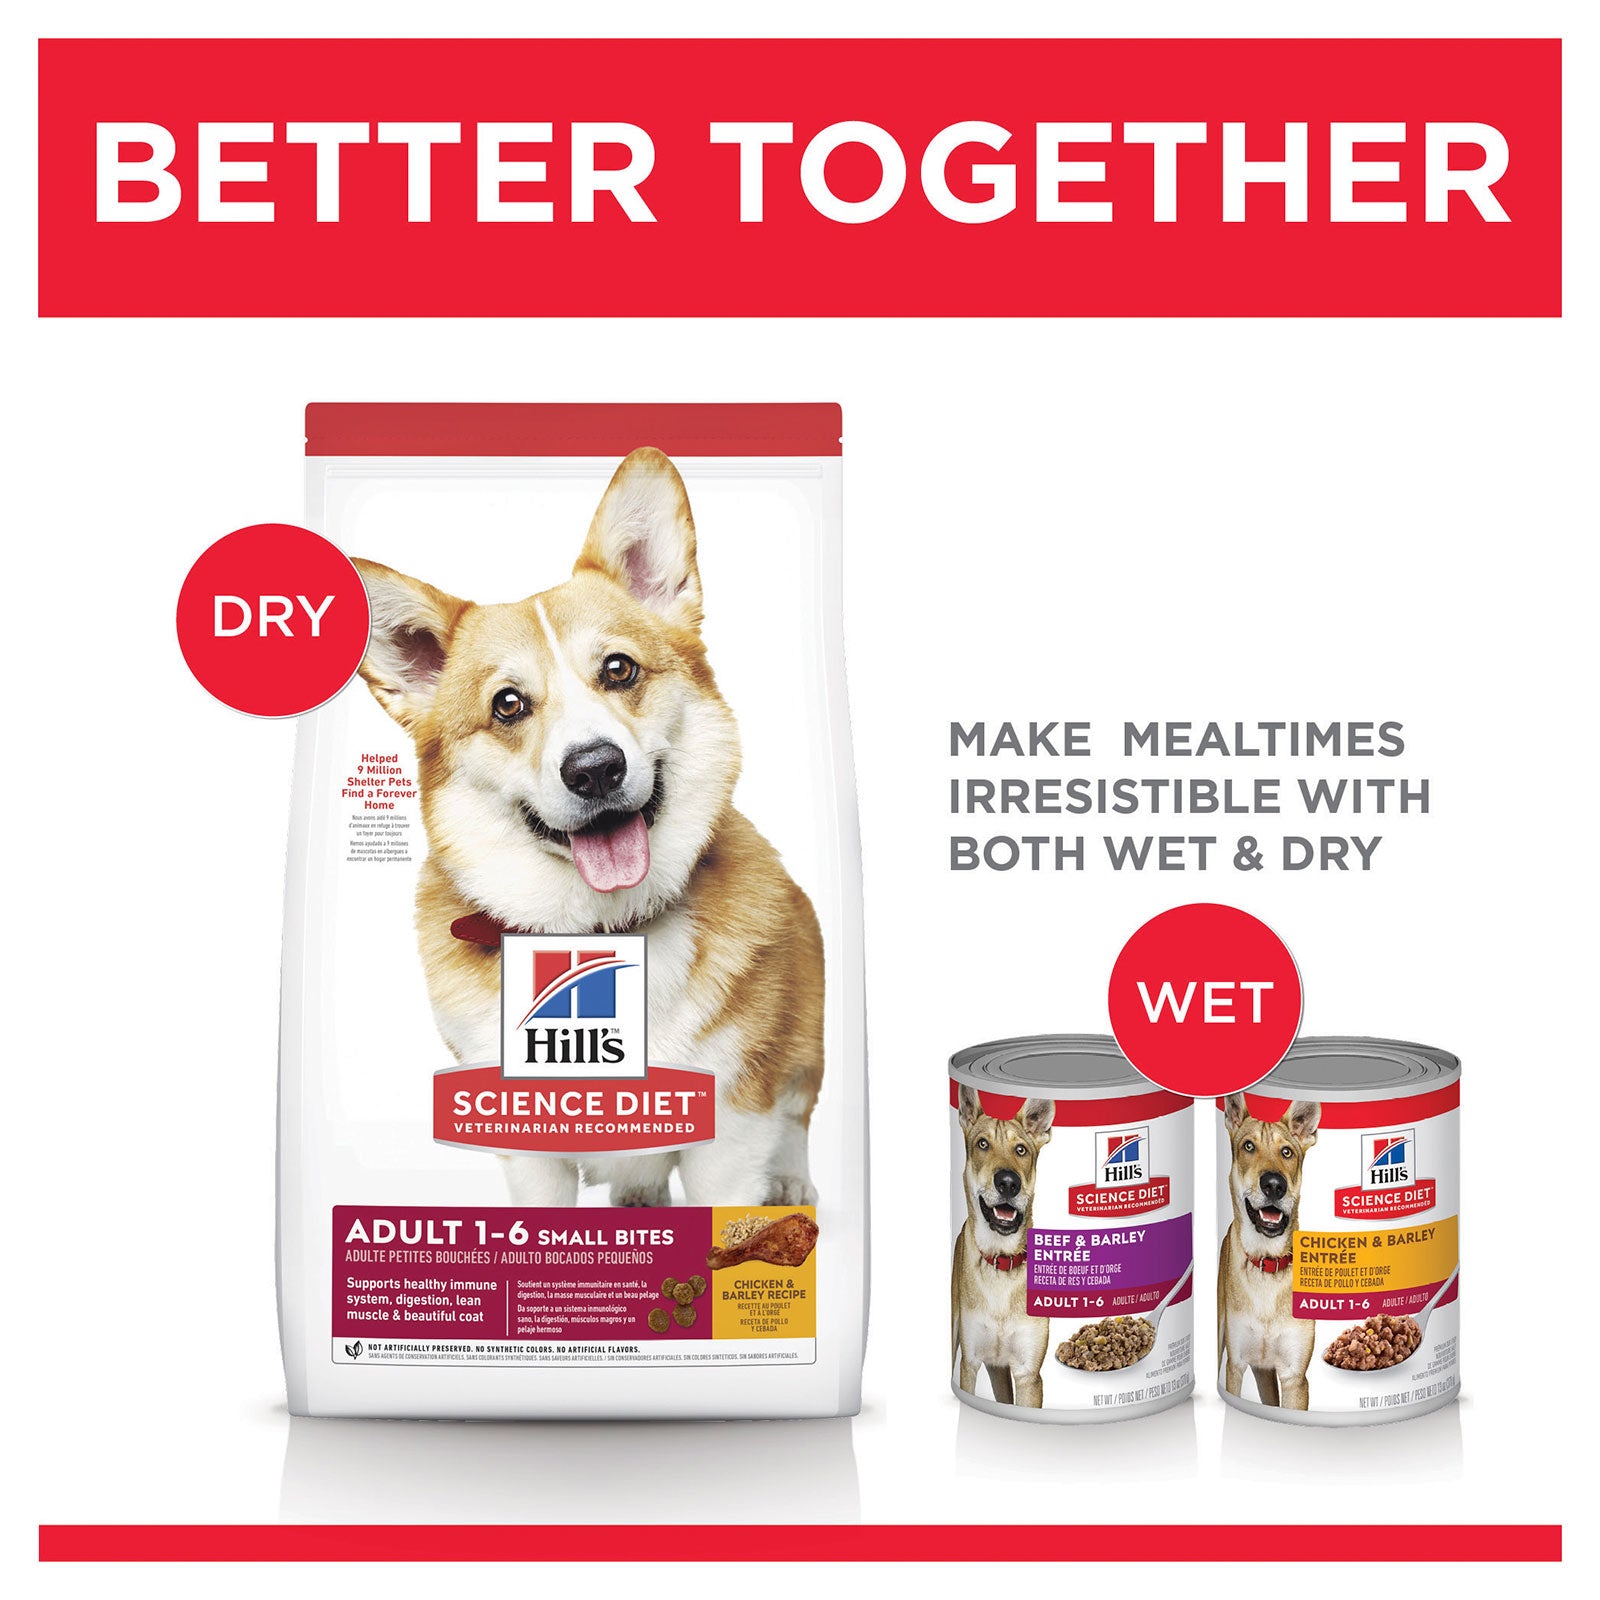 Hill's Science Diet Dog Food Adult Small Bites Chicken